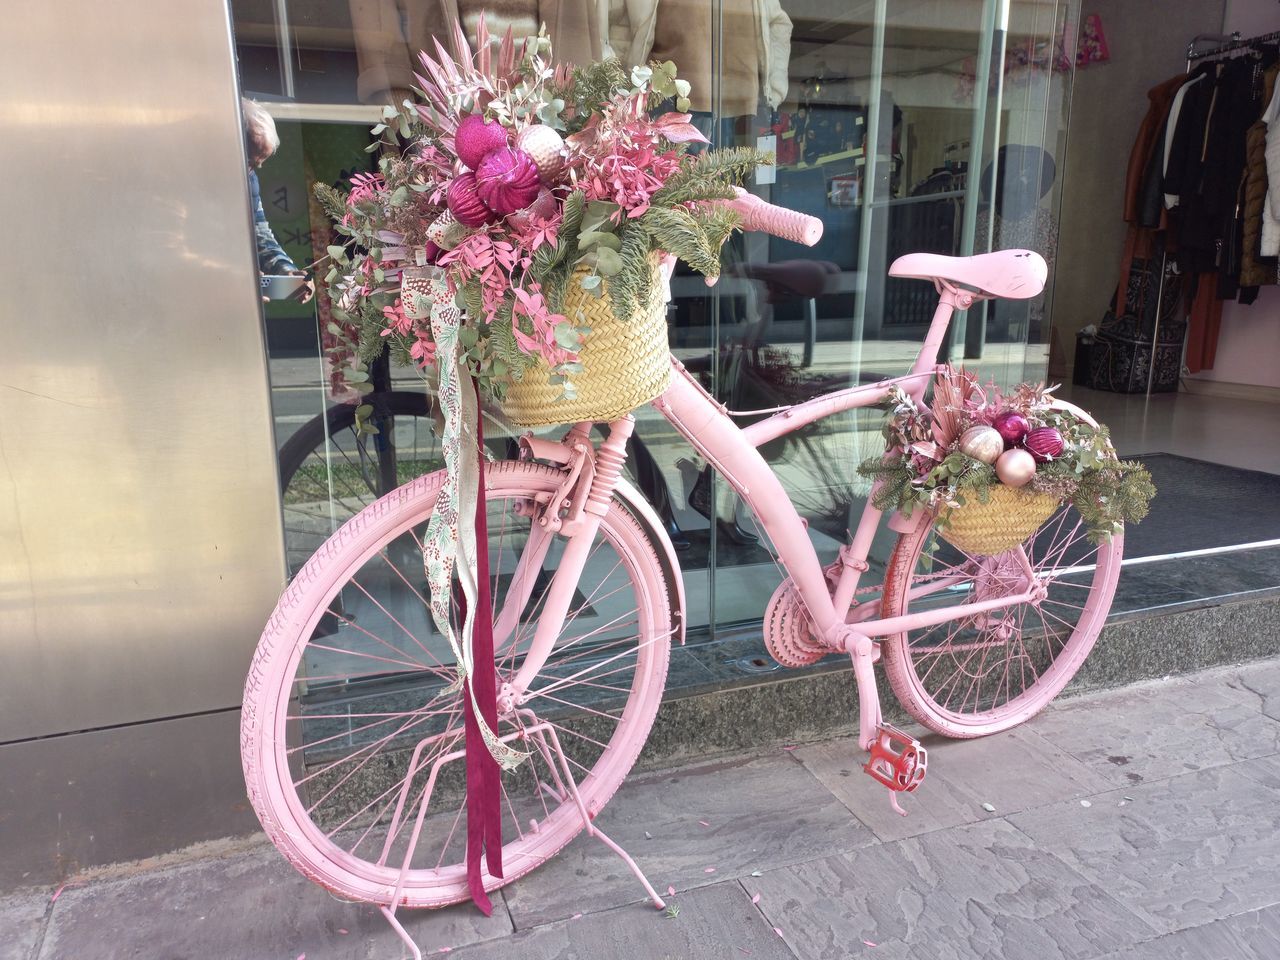 bicycle, transportation, pink, flower, flowering plant, vehicle, mode of transportation, land vehicle, plant, city, architecture, no people, nature, street, basket, building exterior, wheel, sports equipment, day, outdoors, bicycle basket, built structure, road bicycle, bouquet, flower arrangement, window, footpath, sidewalk